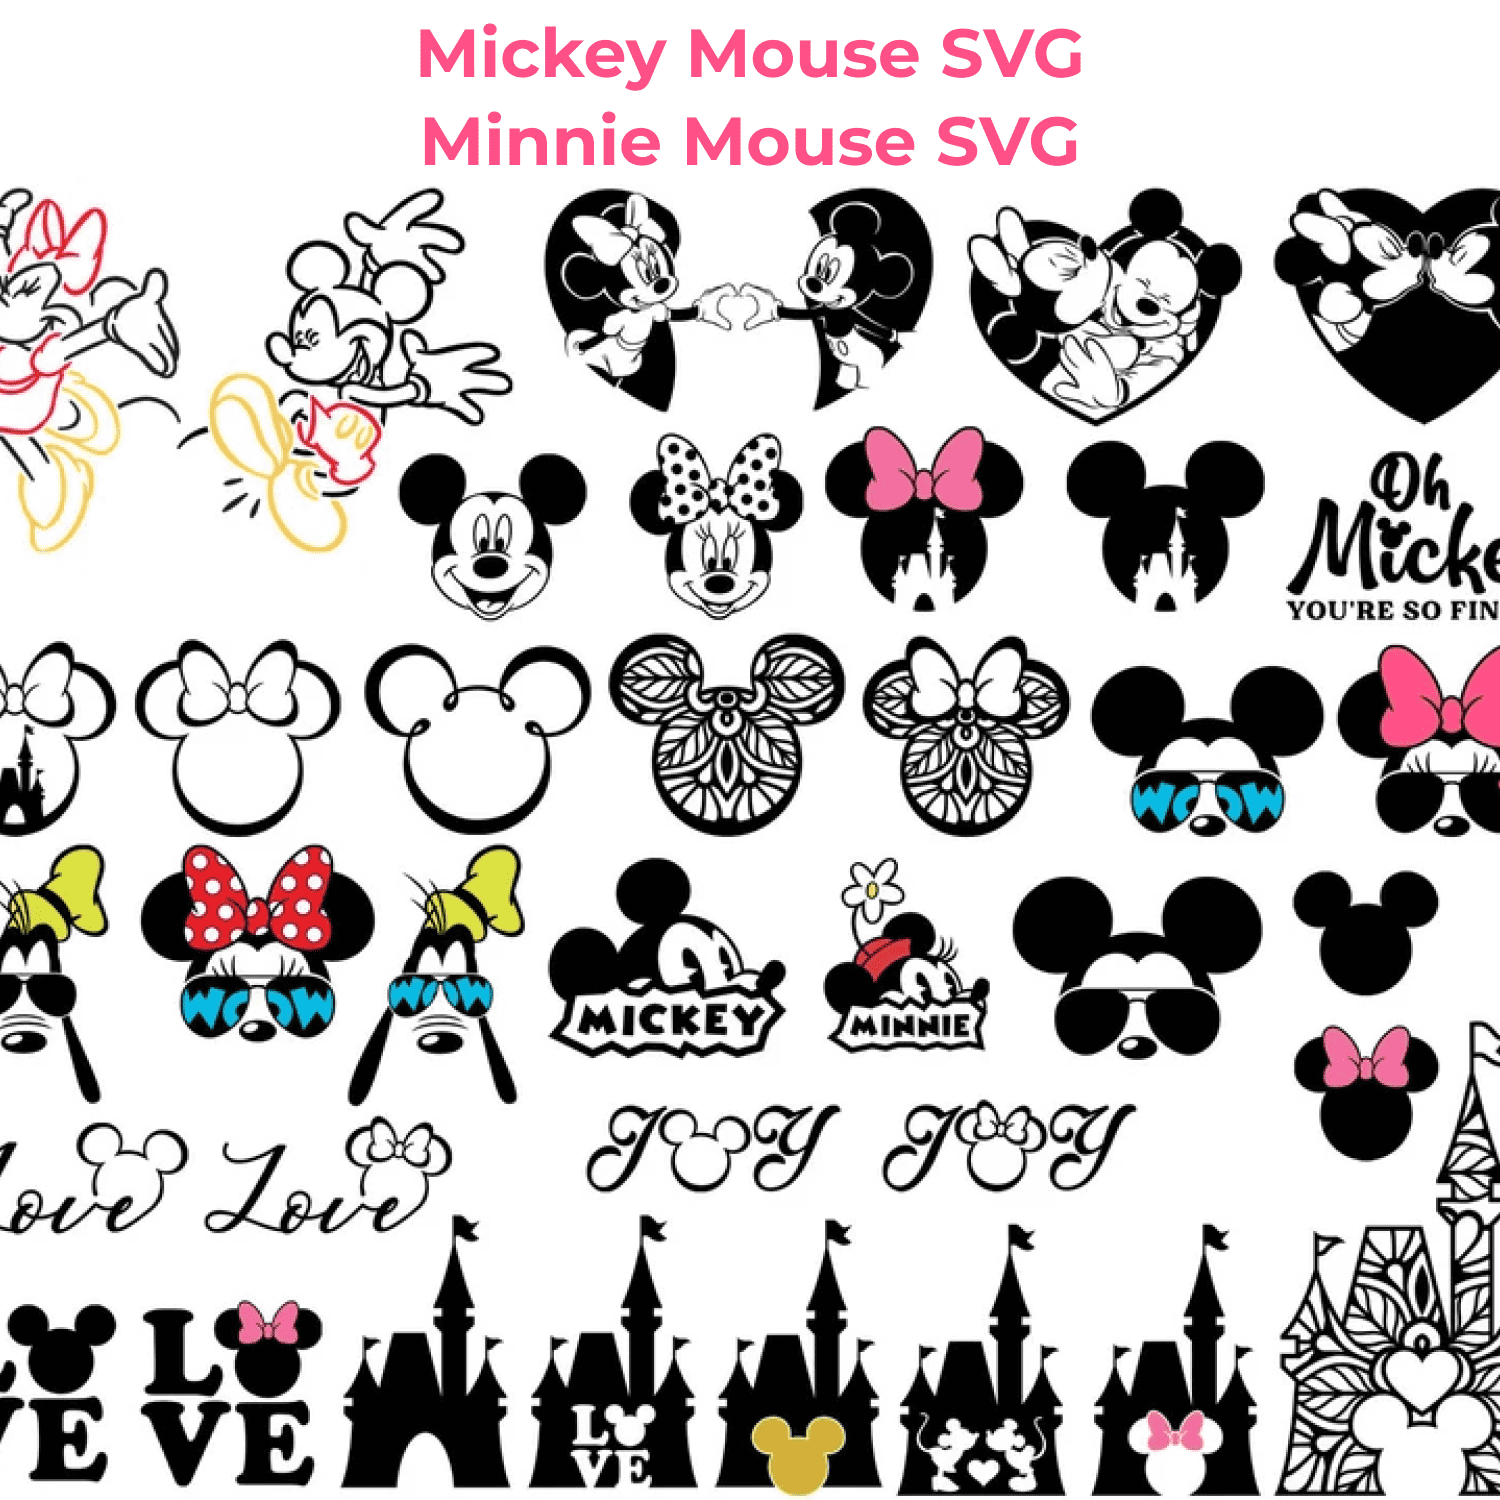 Mickey Mouse SVG, Minnie Mouse SVG, Mickey Head, Minnie Bow cover.